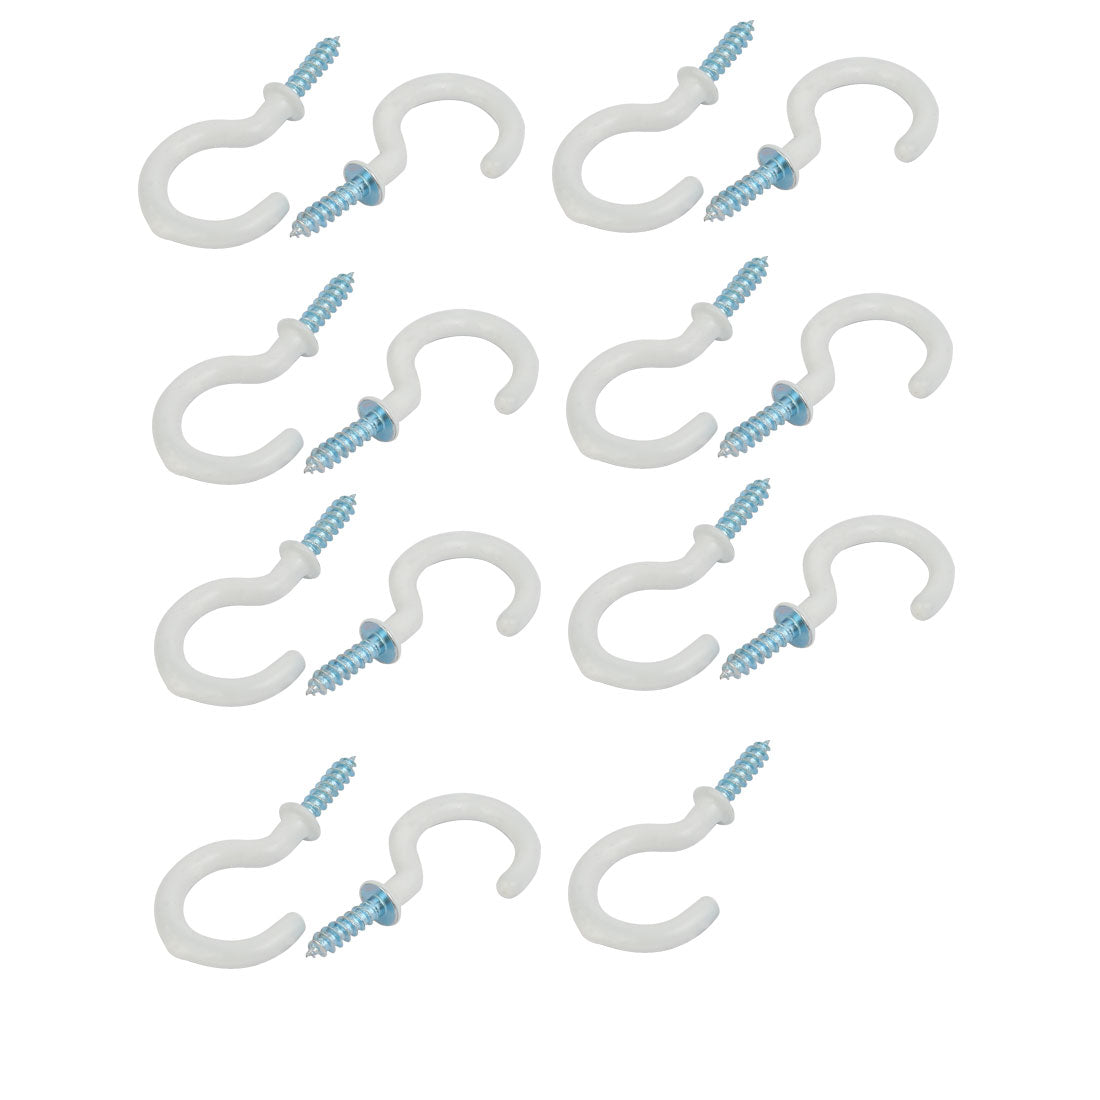 uxcell Uxcell 1 Inch Plastic Coated Screw-in Open Cup Ceiling Hooks Hangers White 15pcs